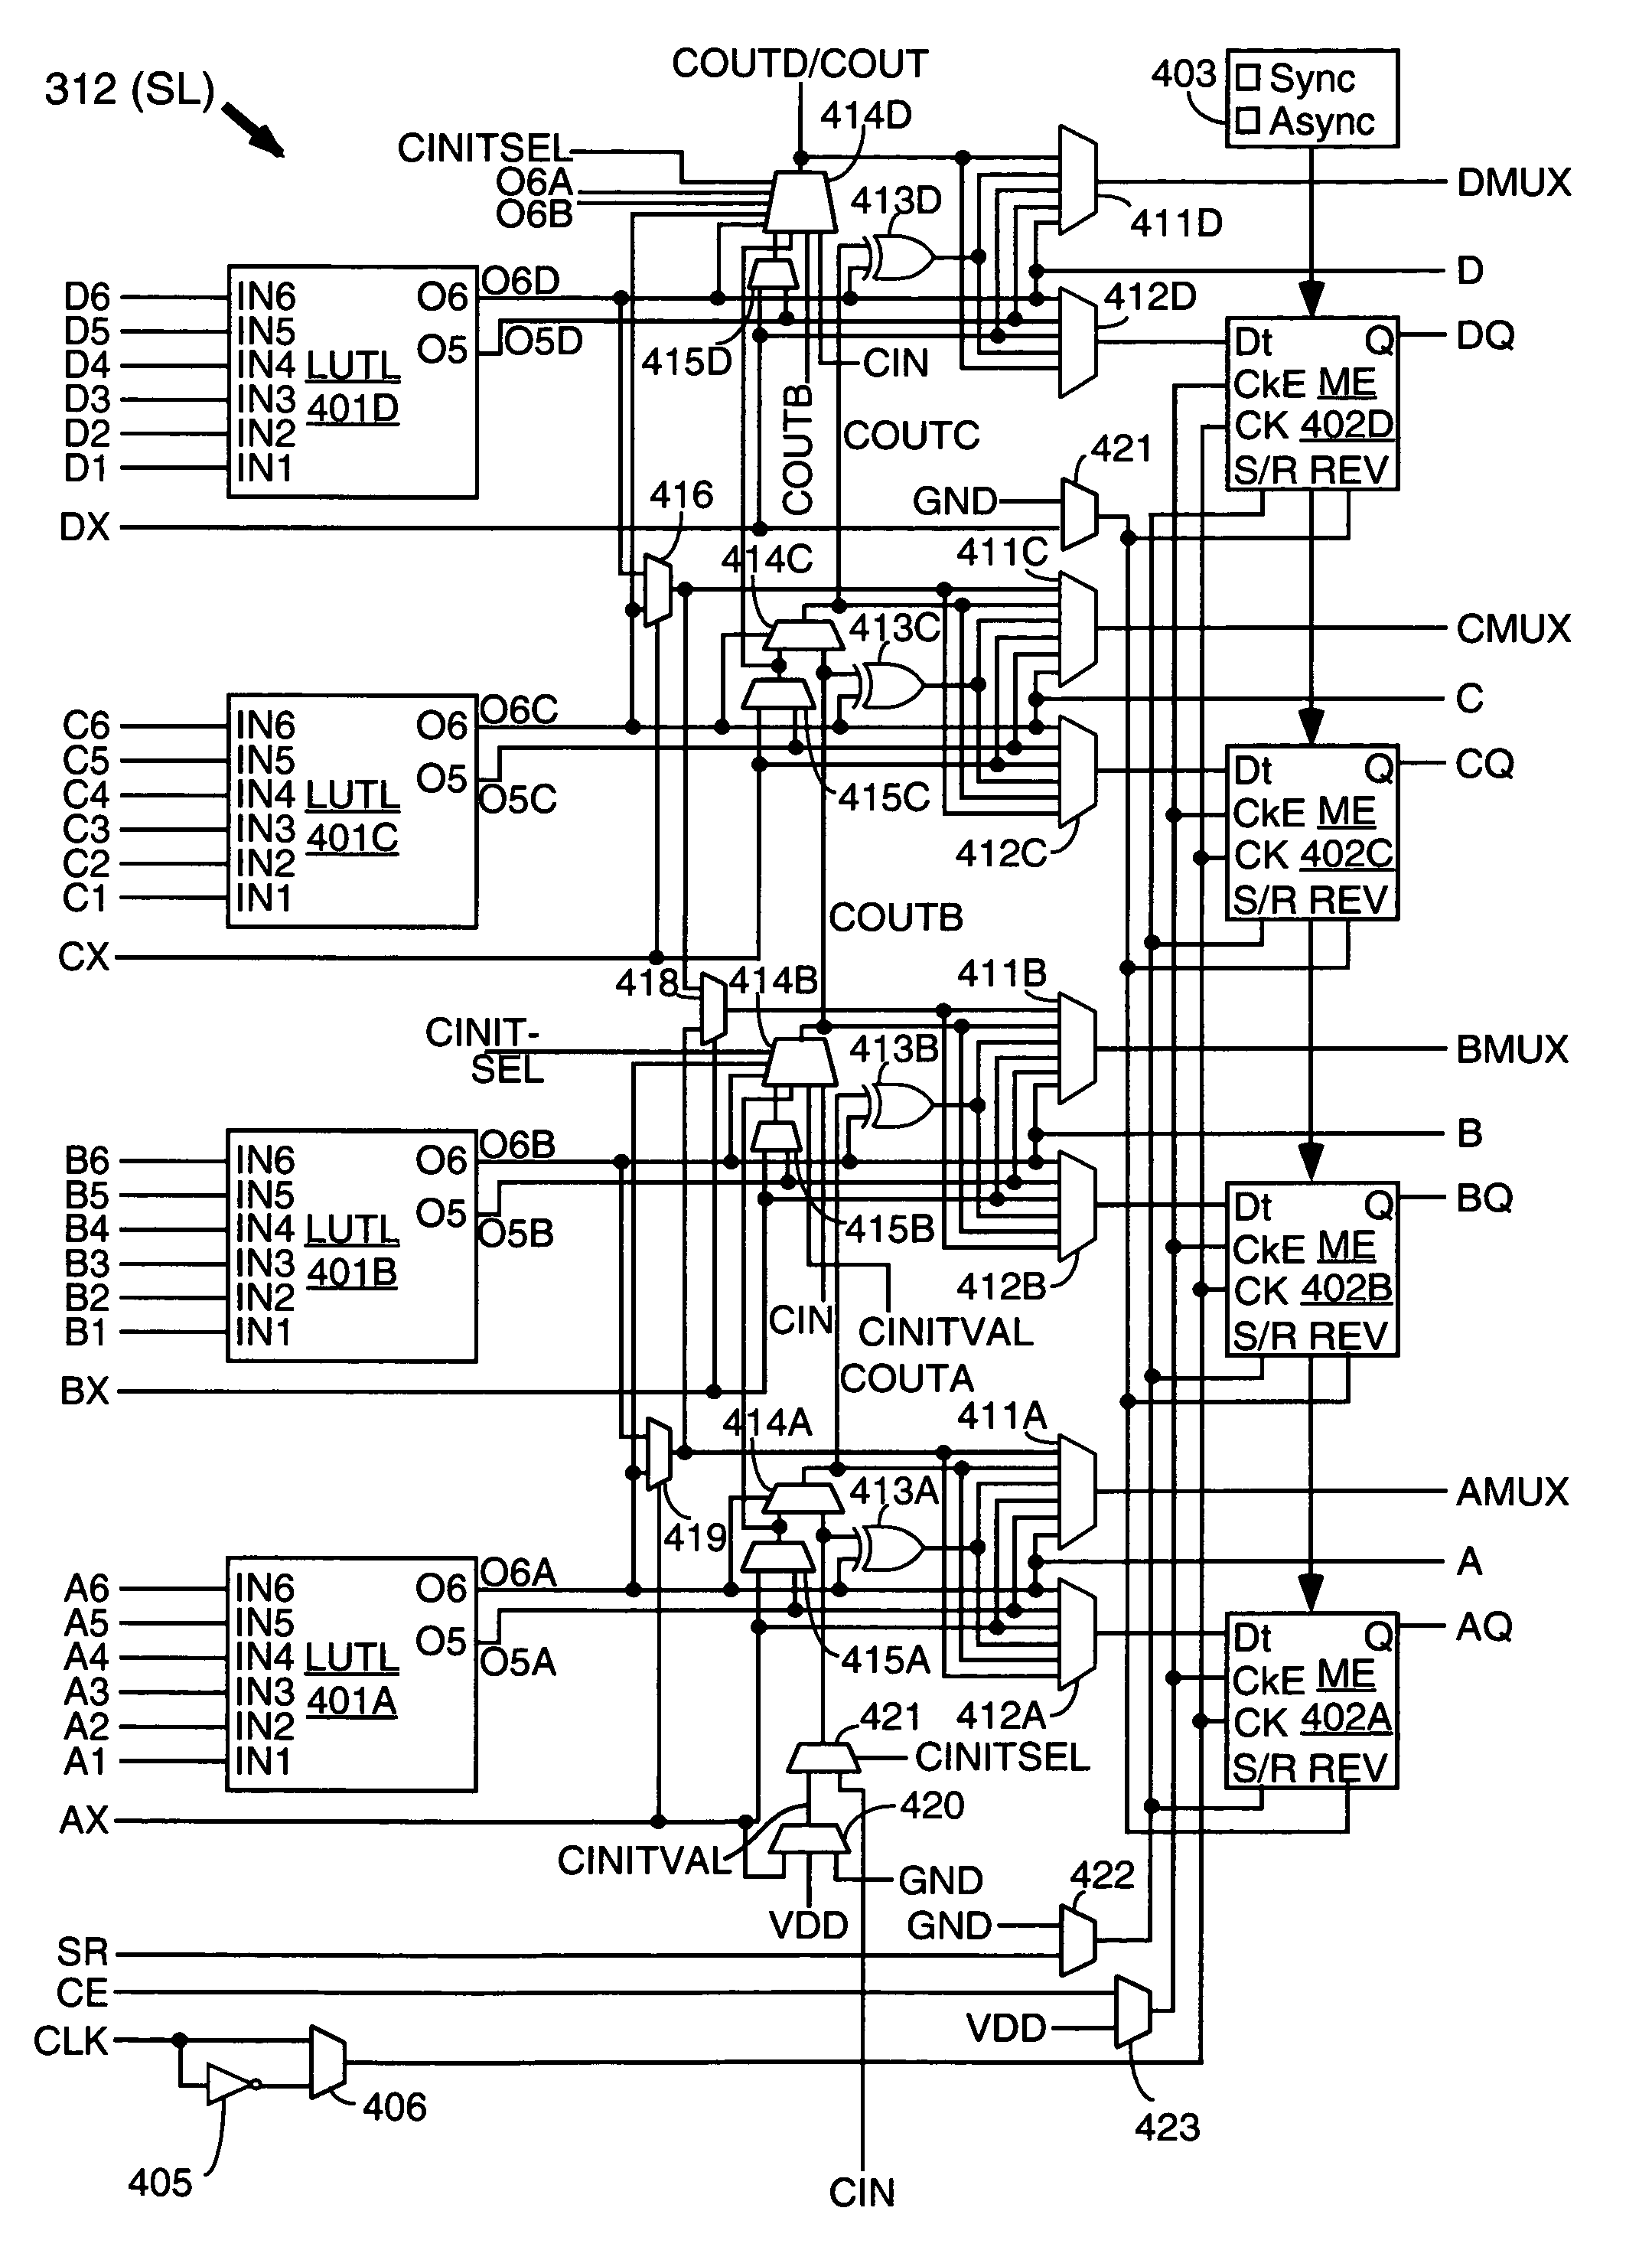 Programmable logic block having reduced output delay during RAM write processes when programmed to function in RAM mode